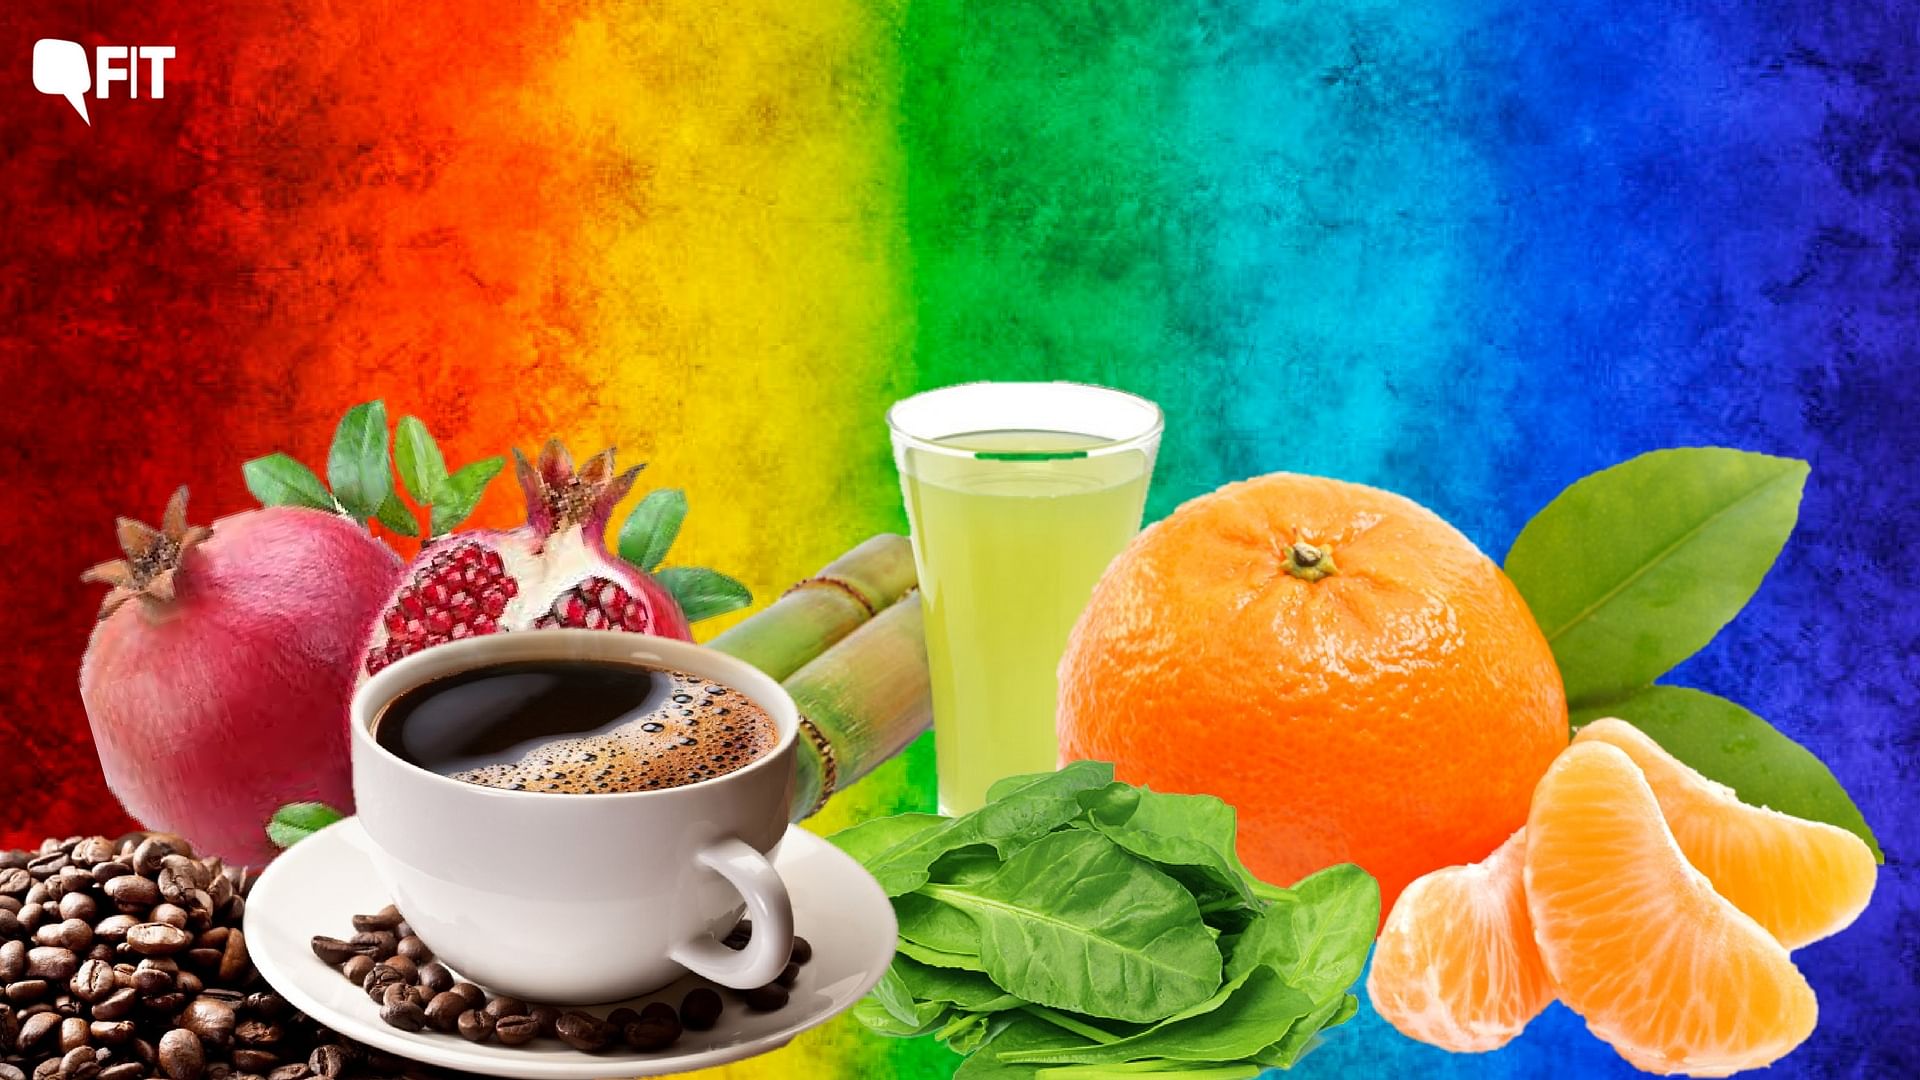 How often have you heard the phrase “Eat a rainbow diet” and just shrugged and moved on?